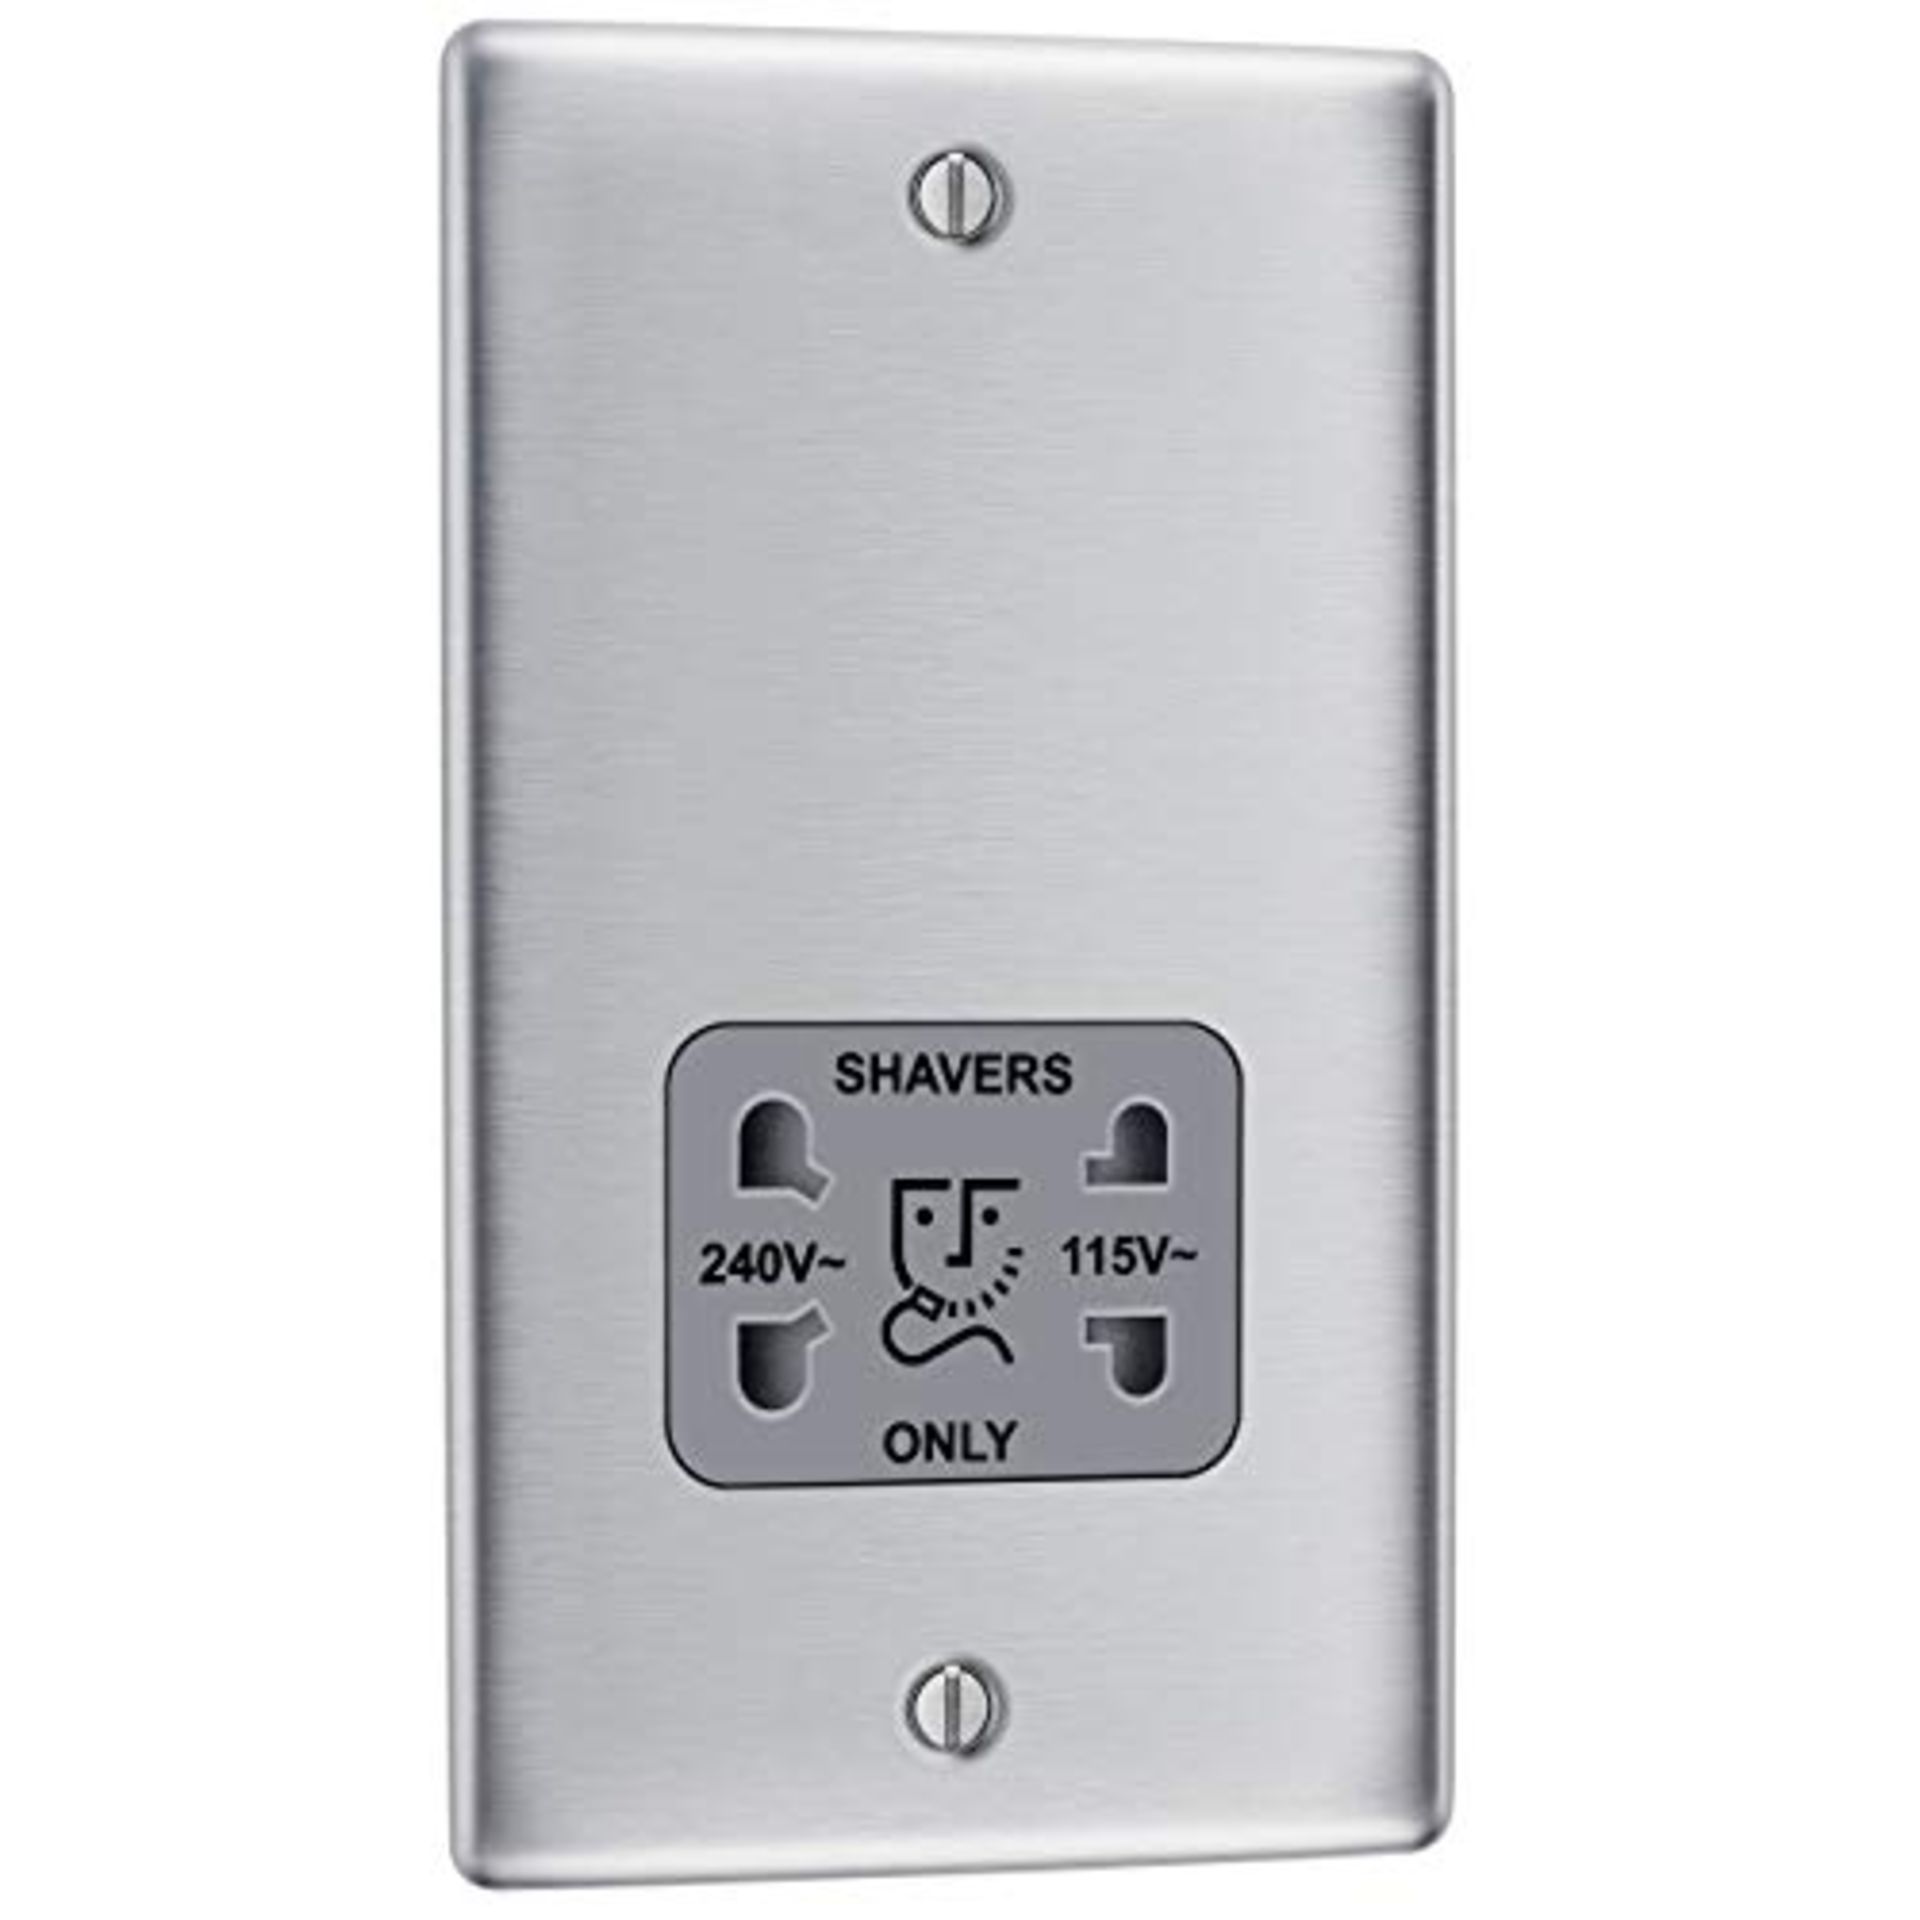 BG Electrical NBS20G-01 115- and 240-Volts Dual Voltage Shaver Socket, Brushed Steel w - Image 3 of 3